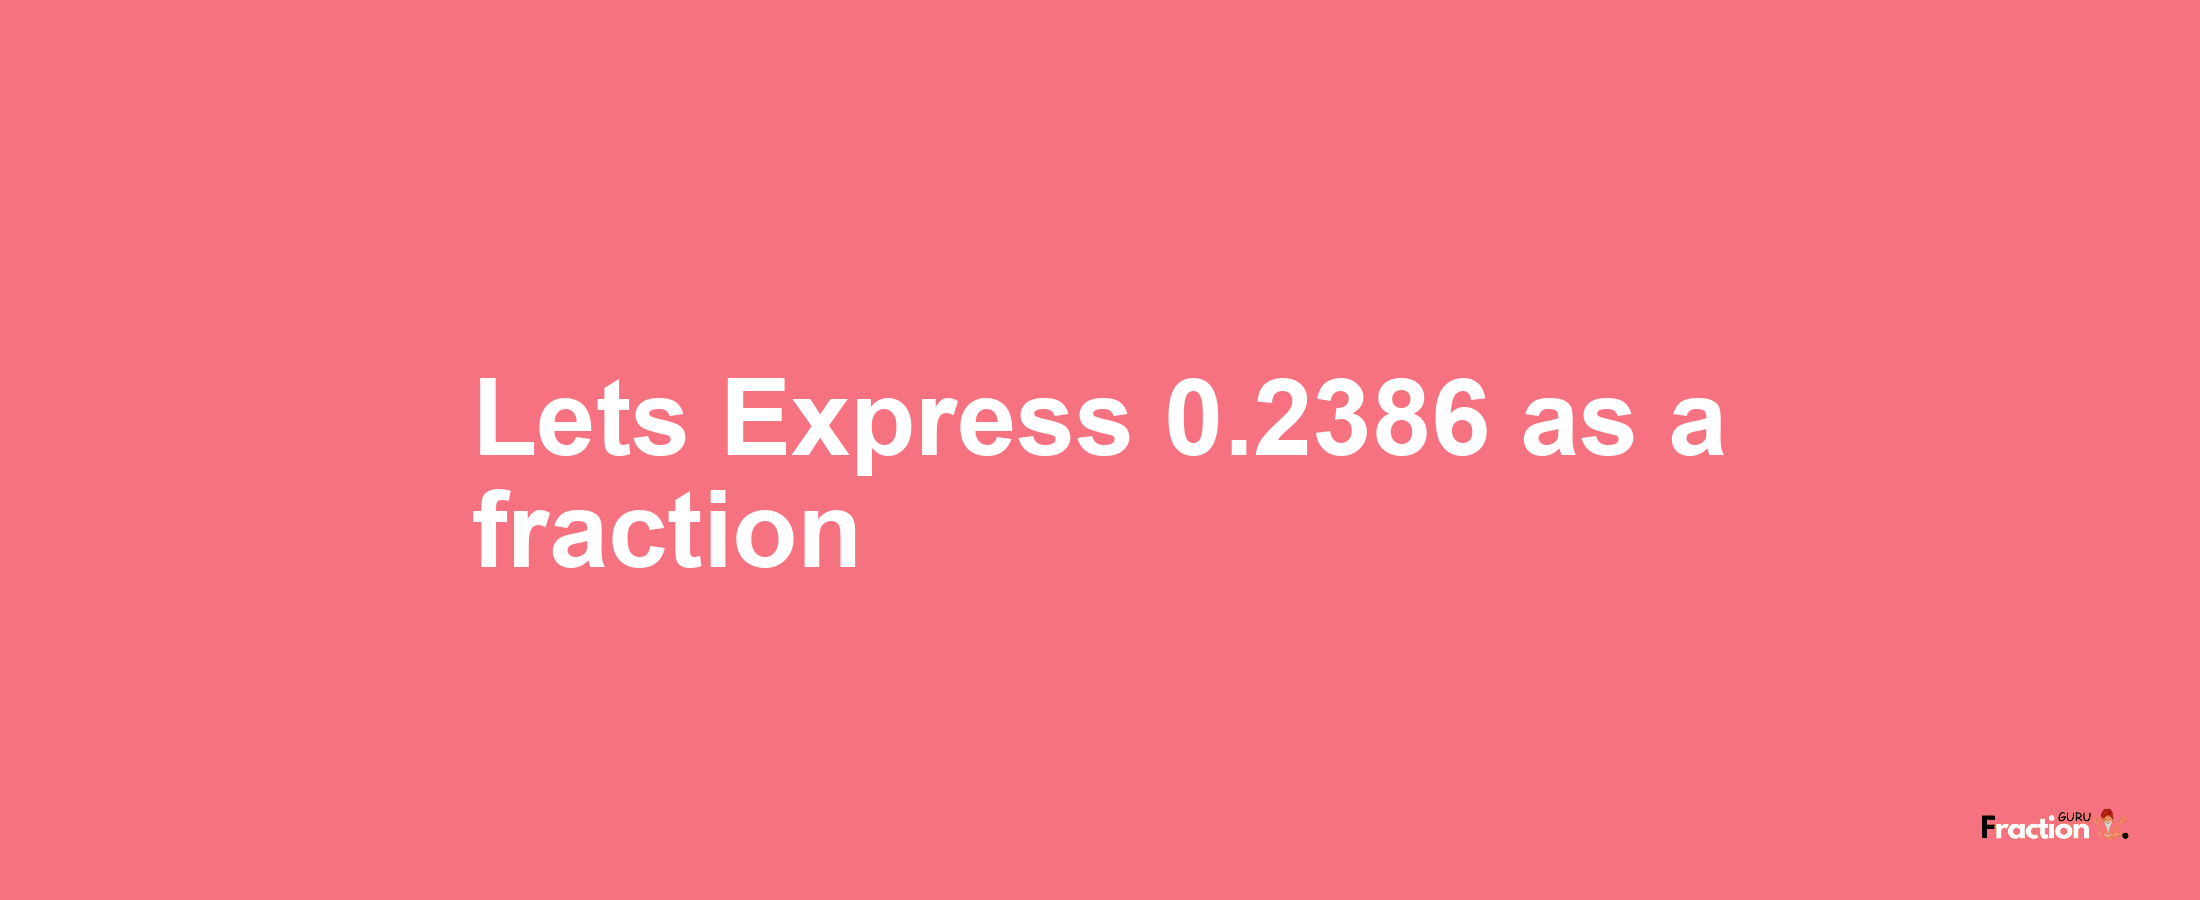 Lets Express 0.2386 as afraction